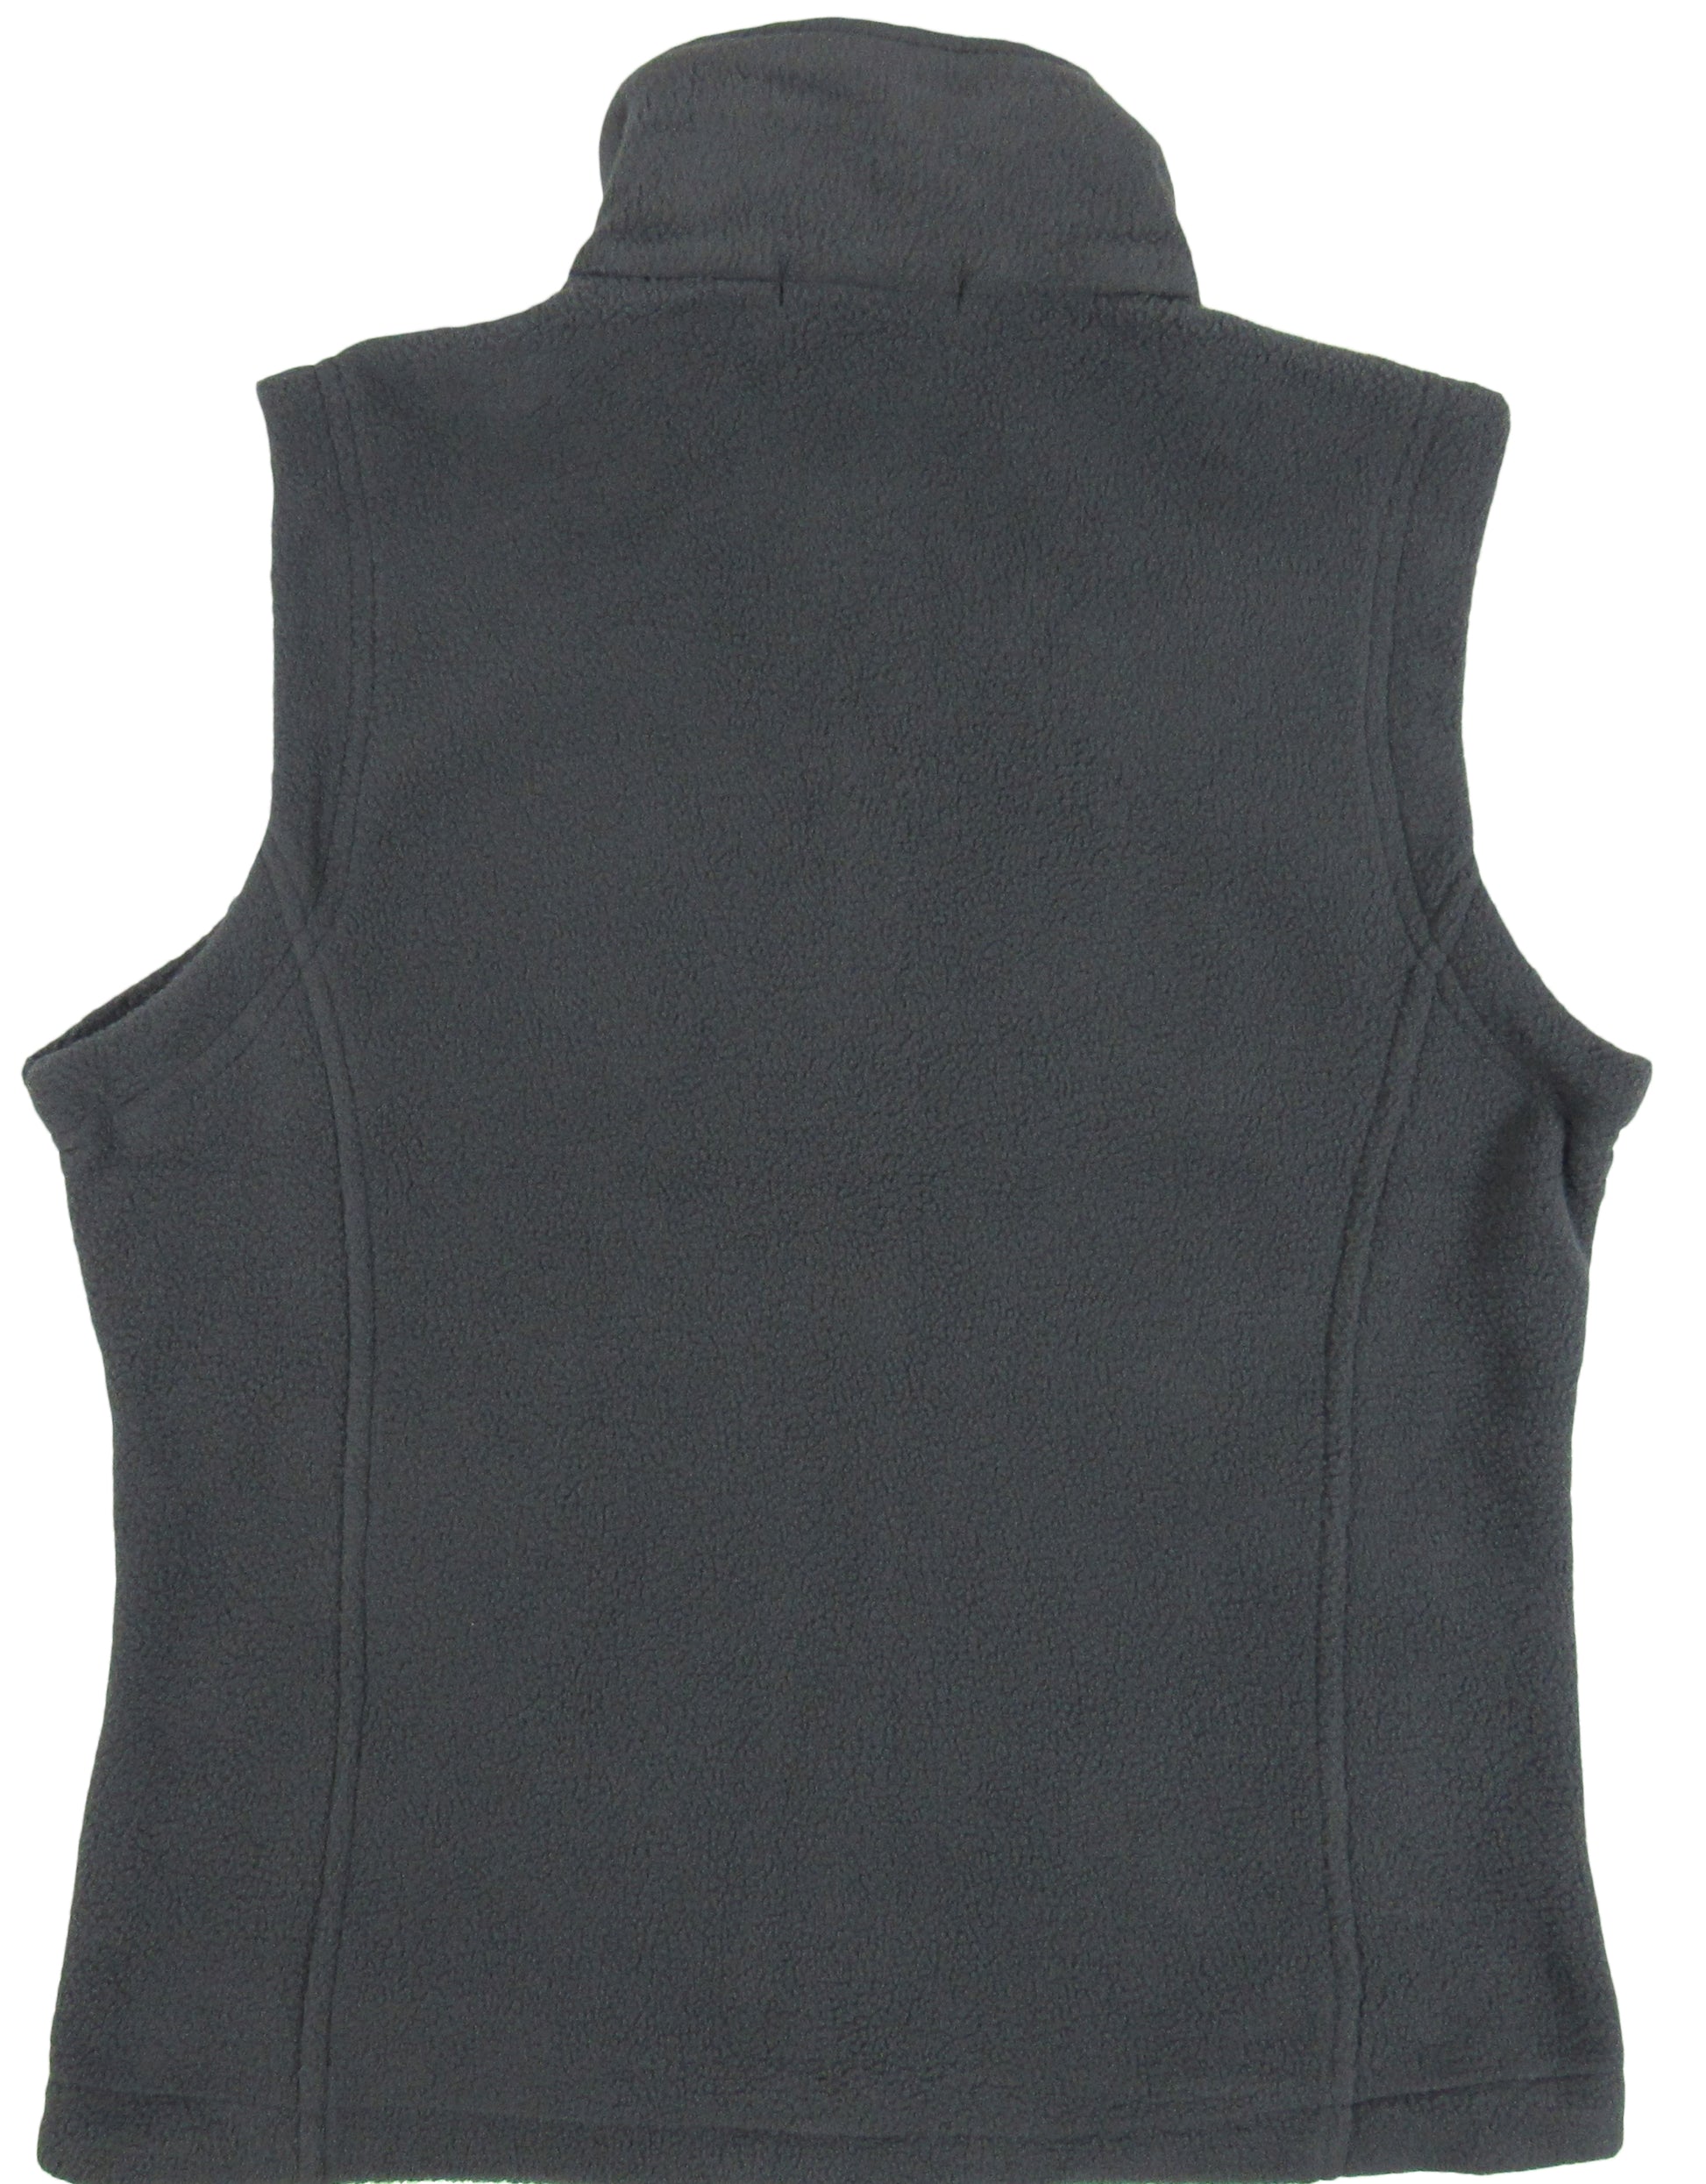 canyon fleece vest with zipper for ladies in graphite gray color